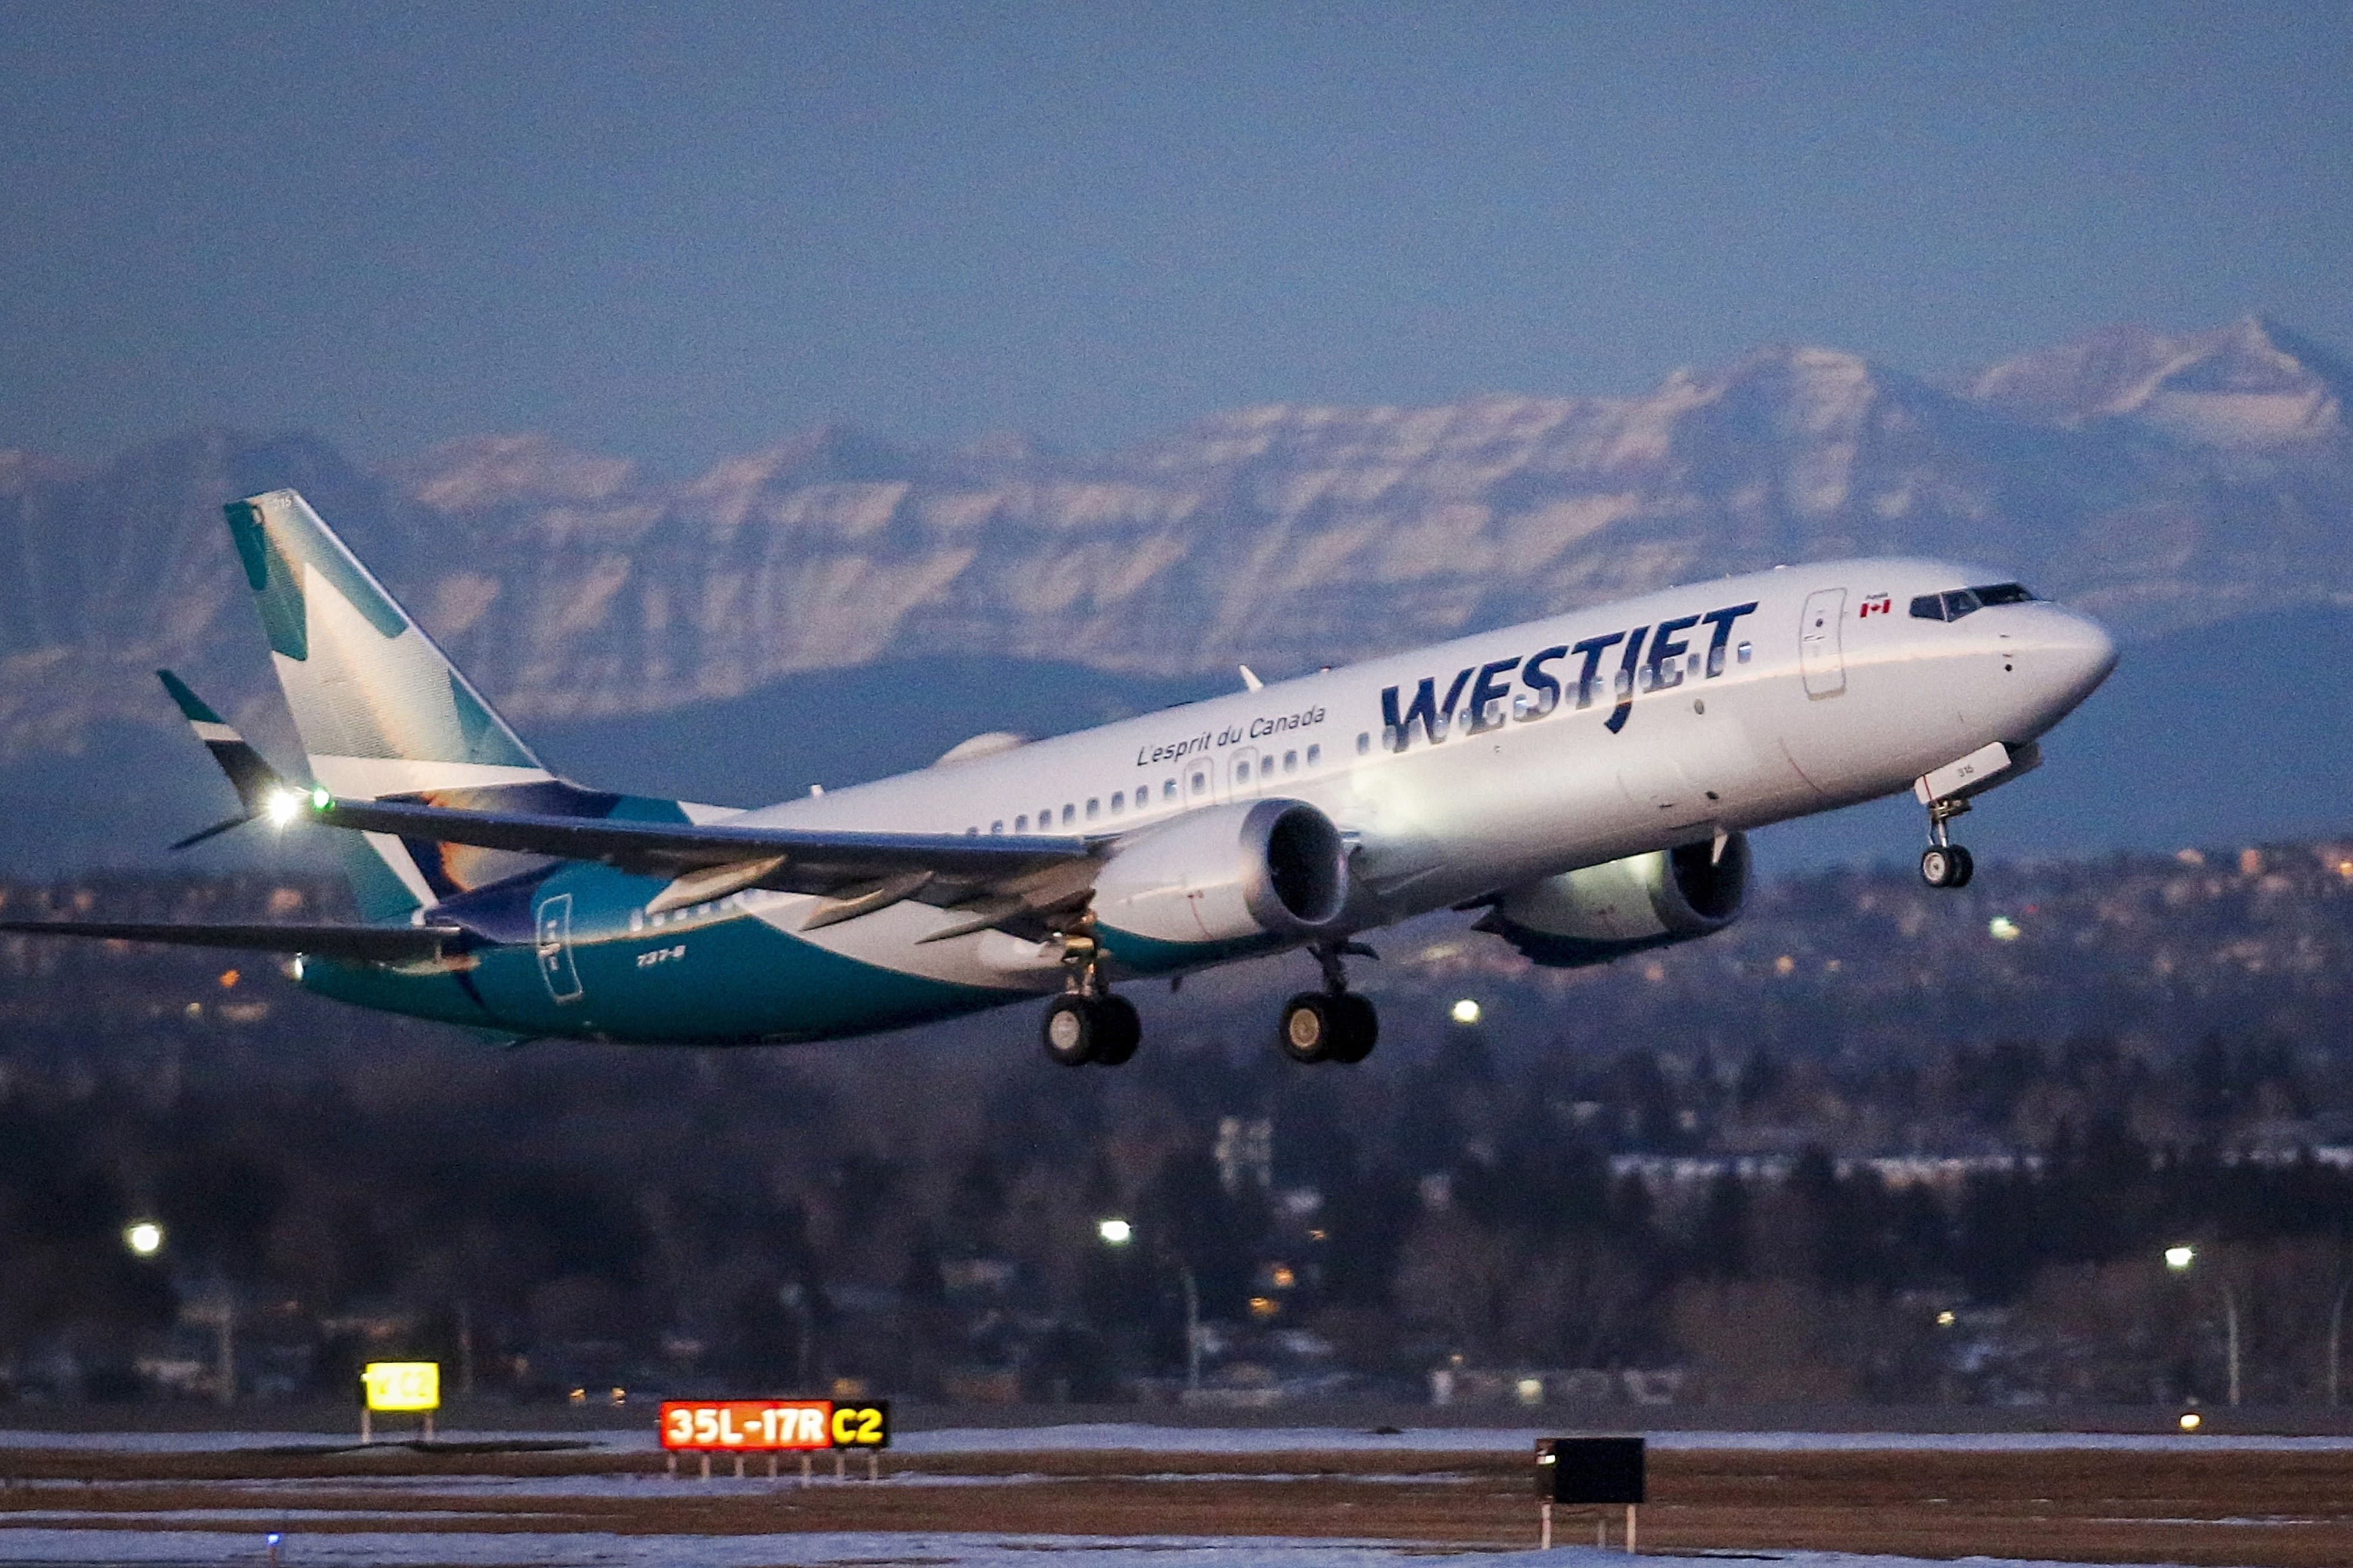 Was your WestJet flight cancelled this weekend? Here's what you need to know